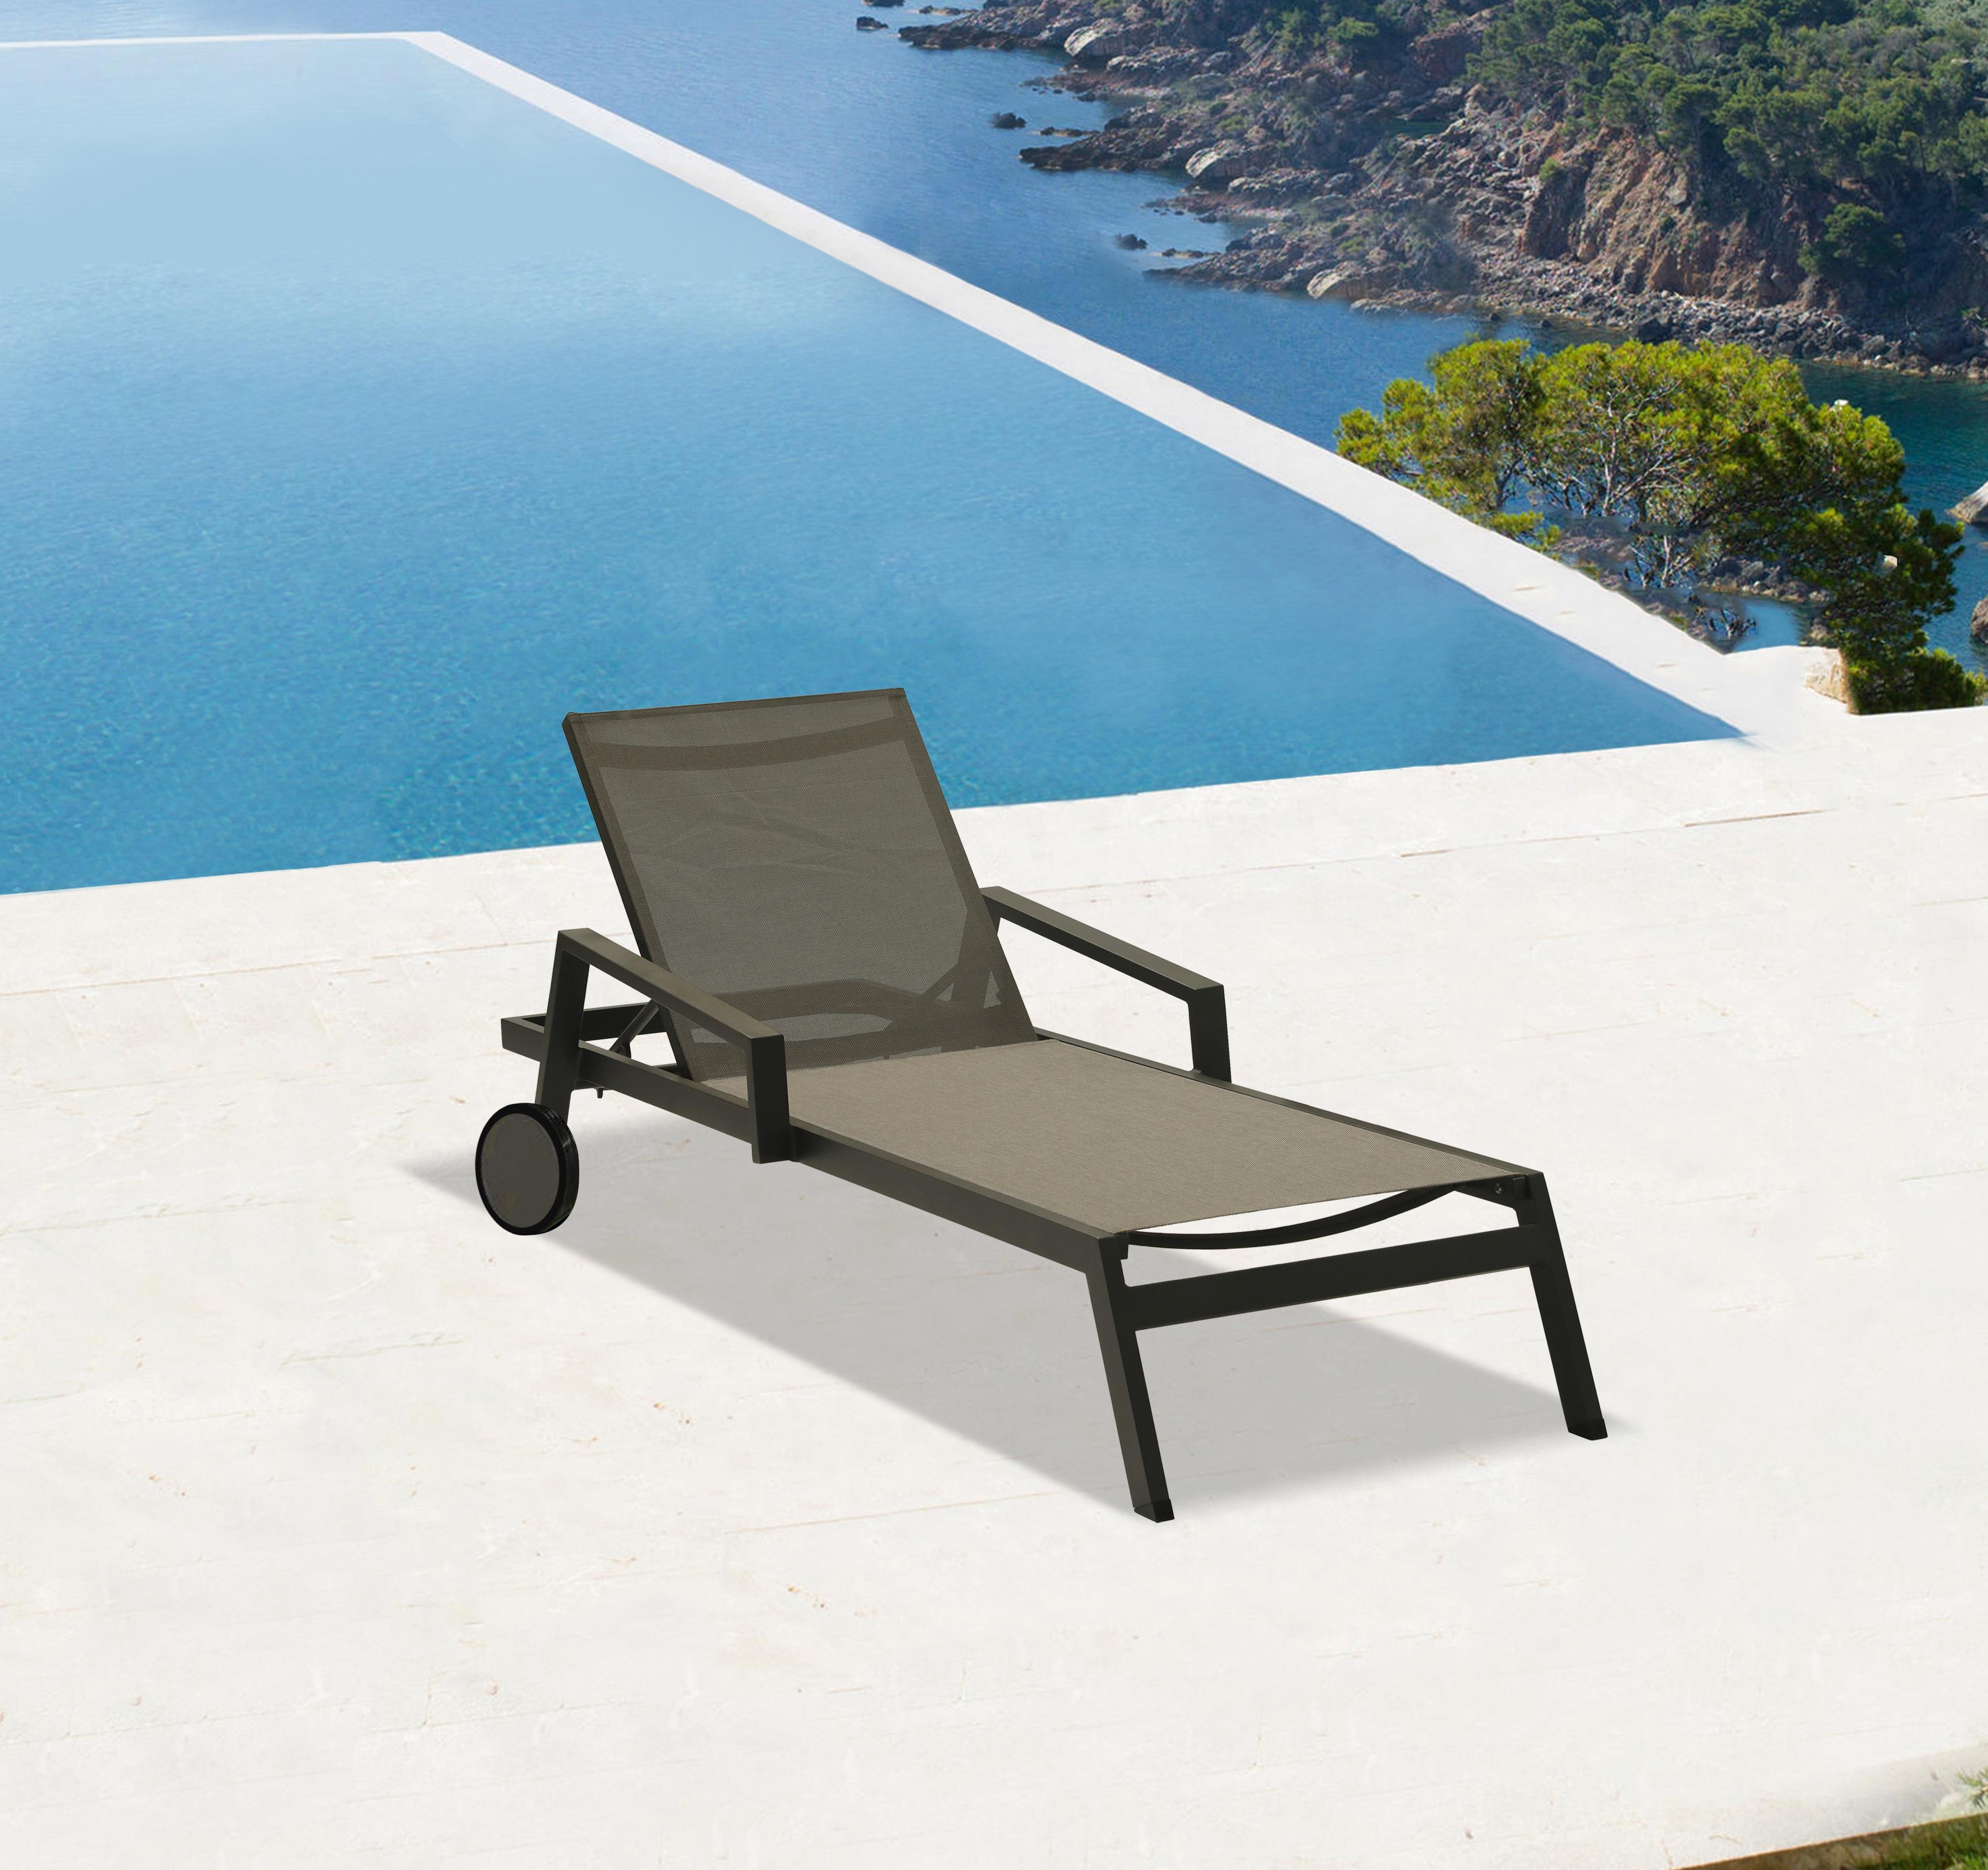 

    
WhiteLine CL1534-GRY Bondi Outdoor Chaise Gray CL1534-GRY
